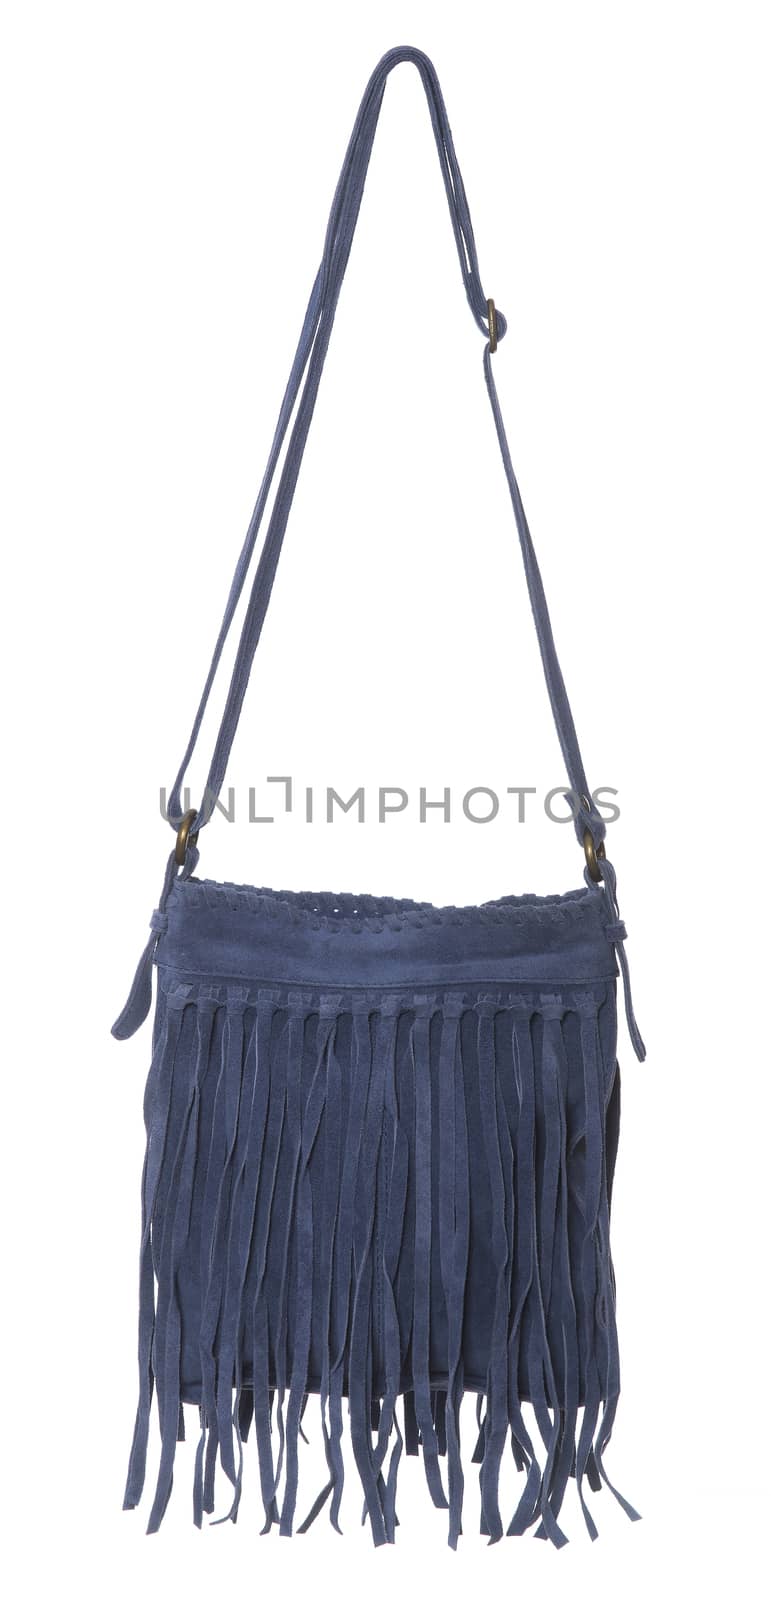 Blue womans purse isolated on white background